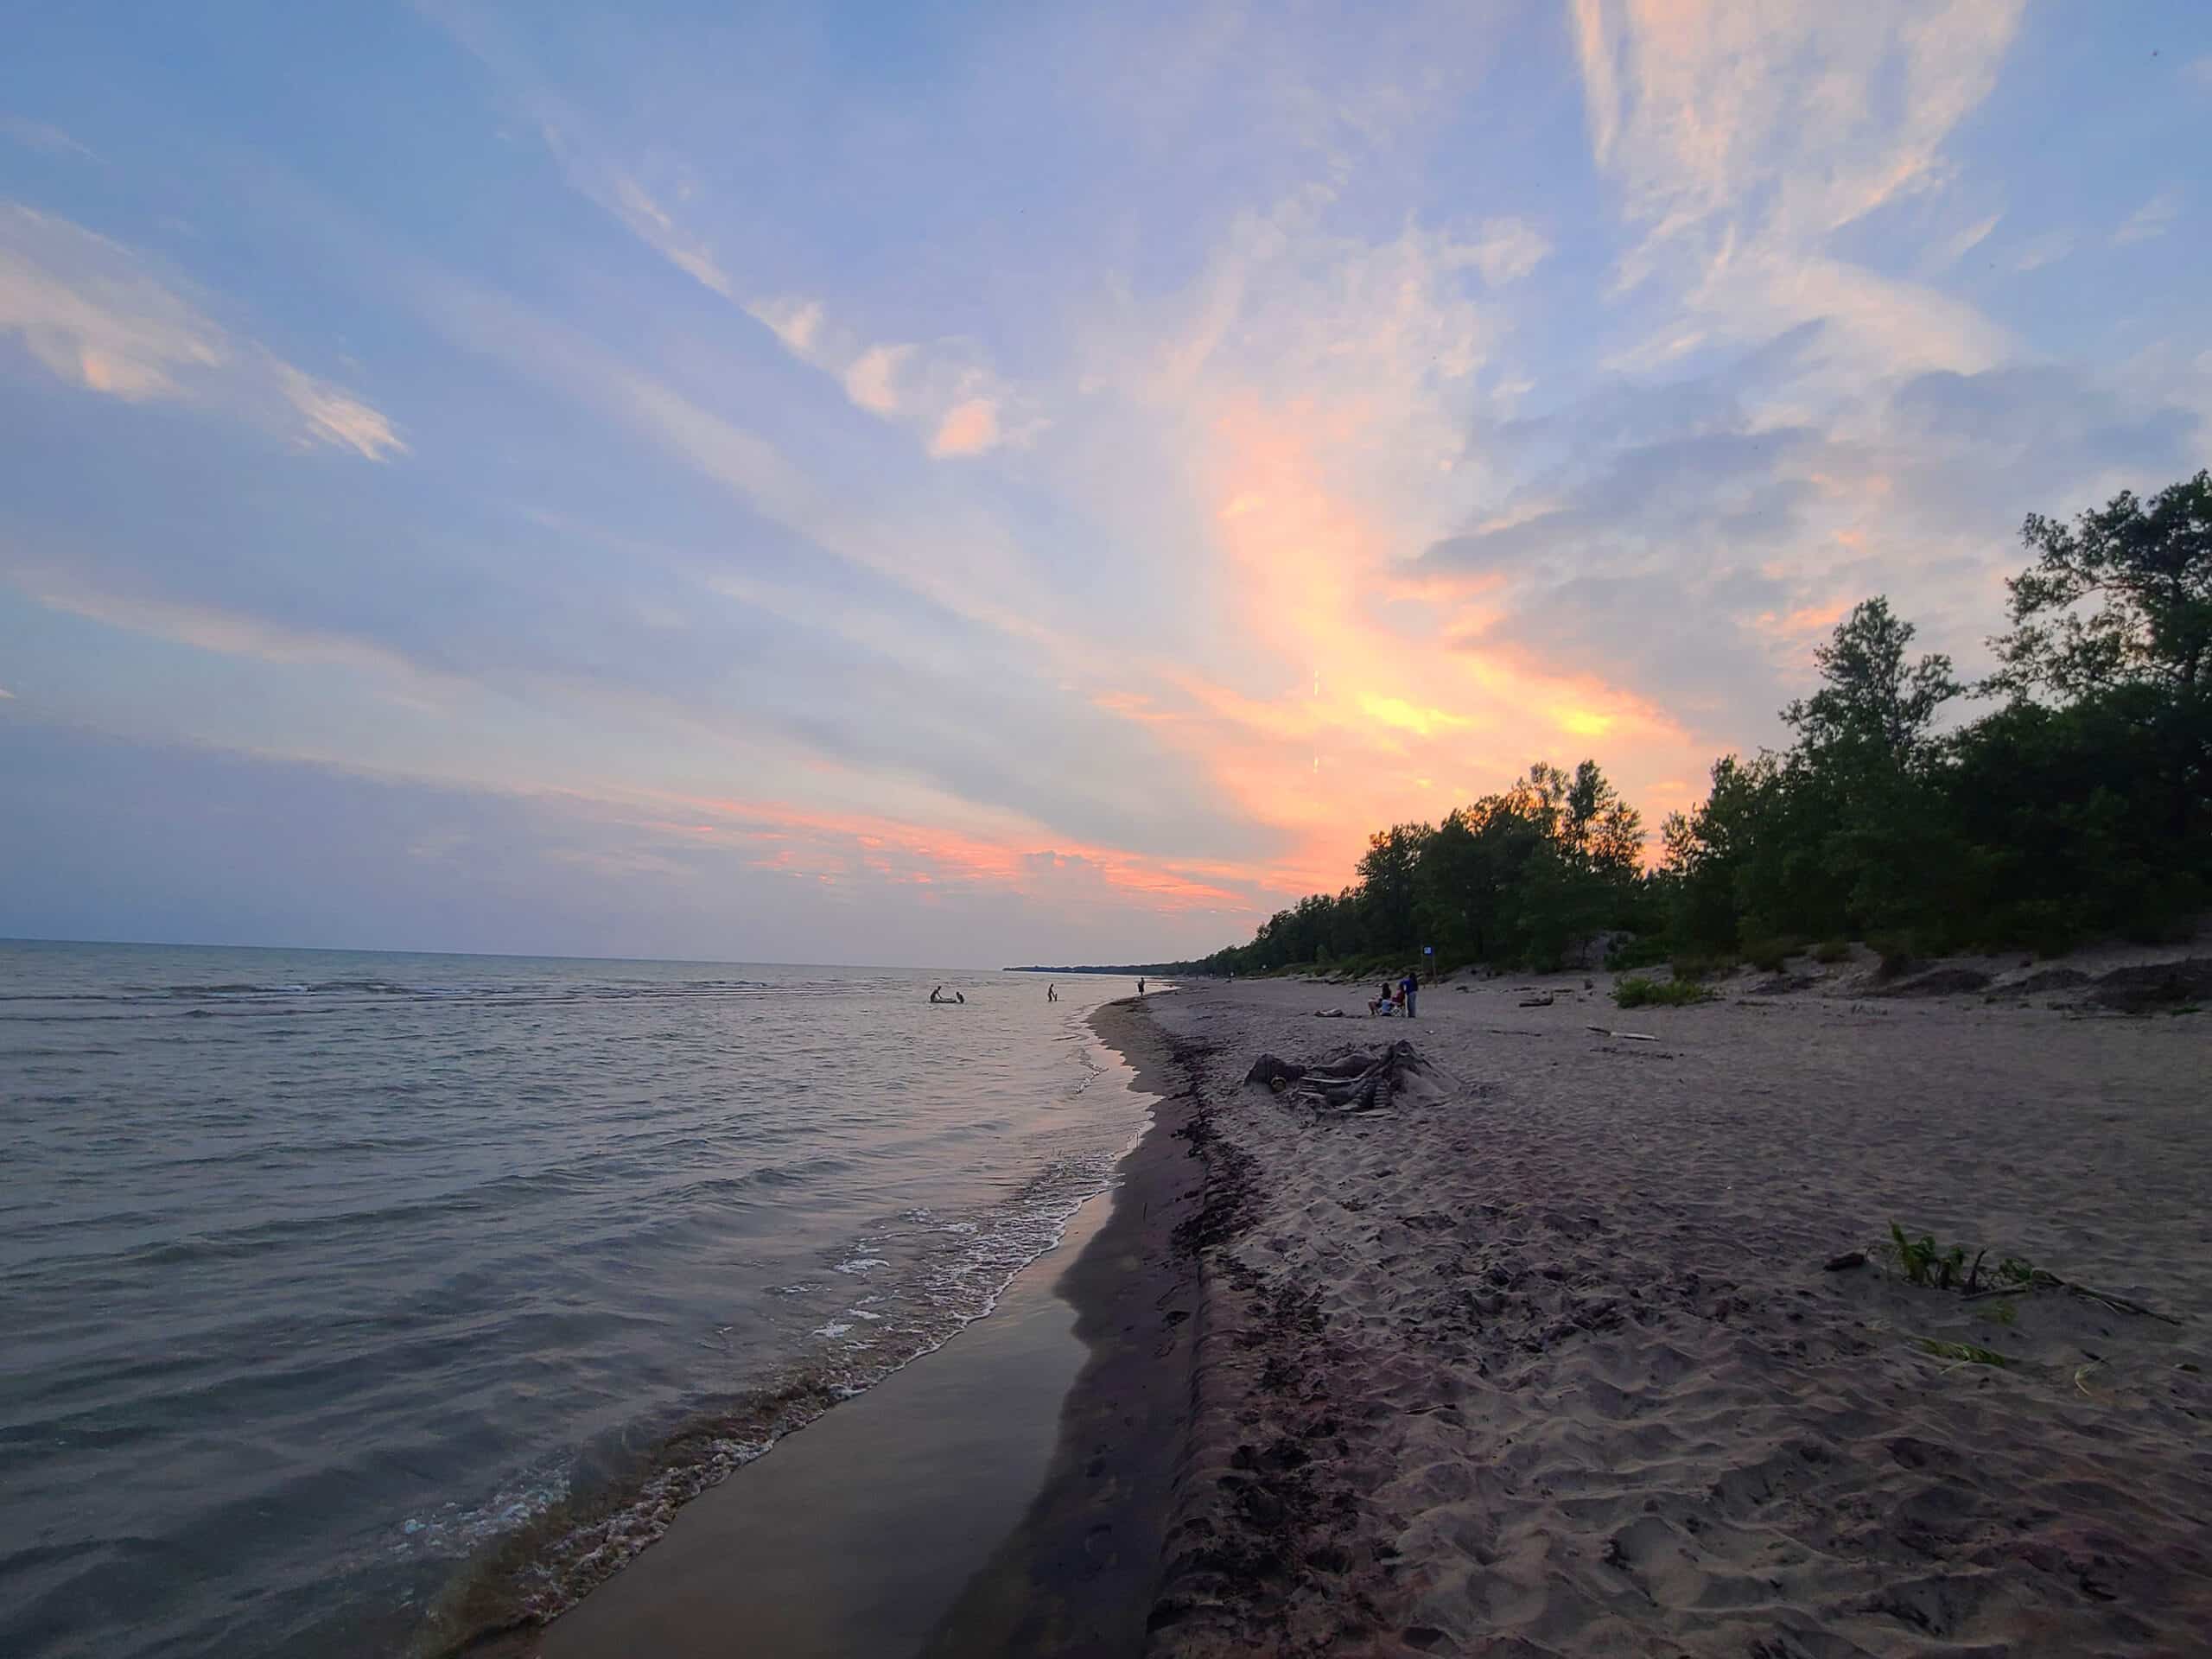 The sun setting over lake erie at Long Point provincial park.